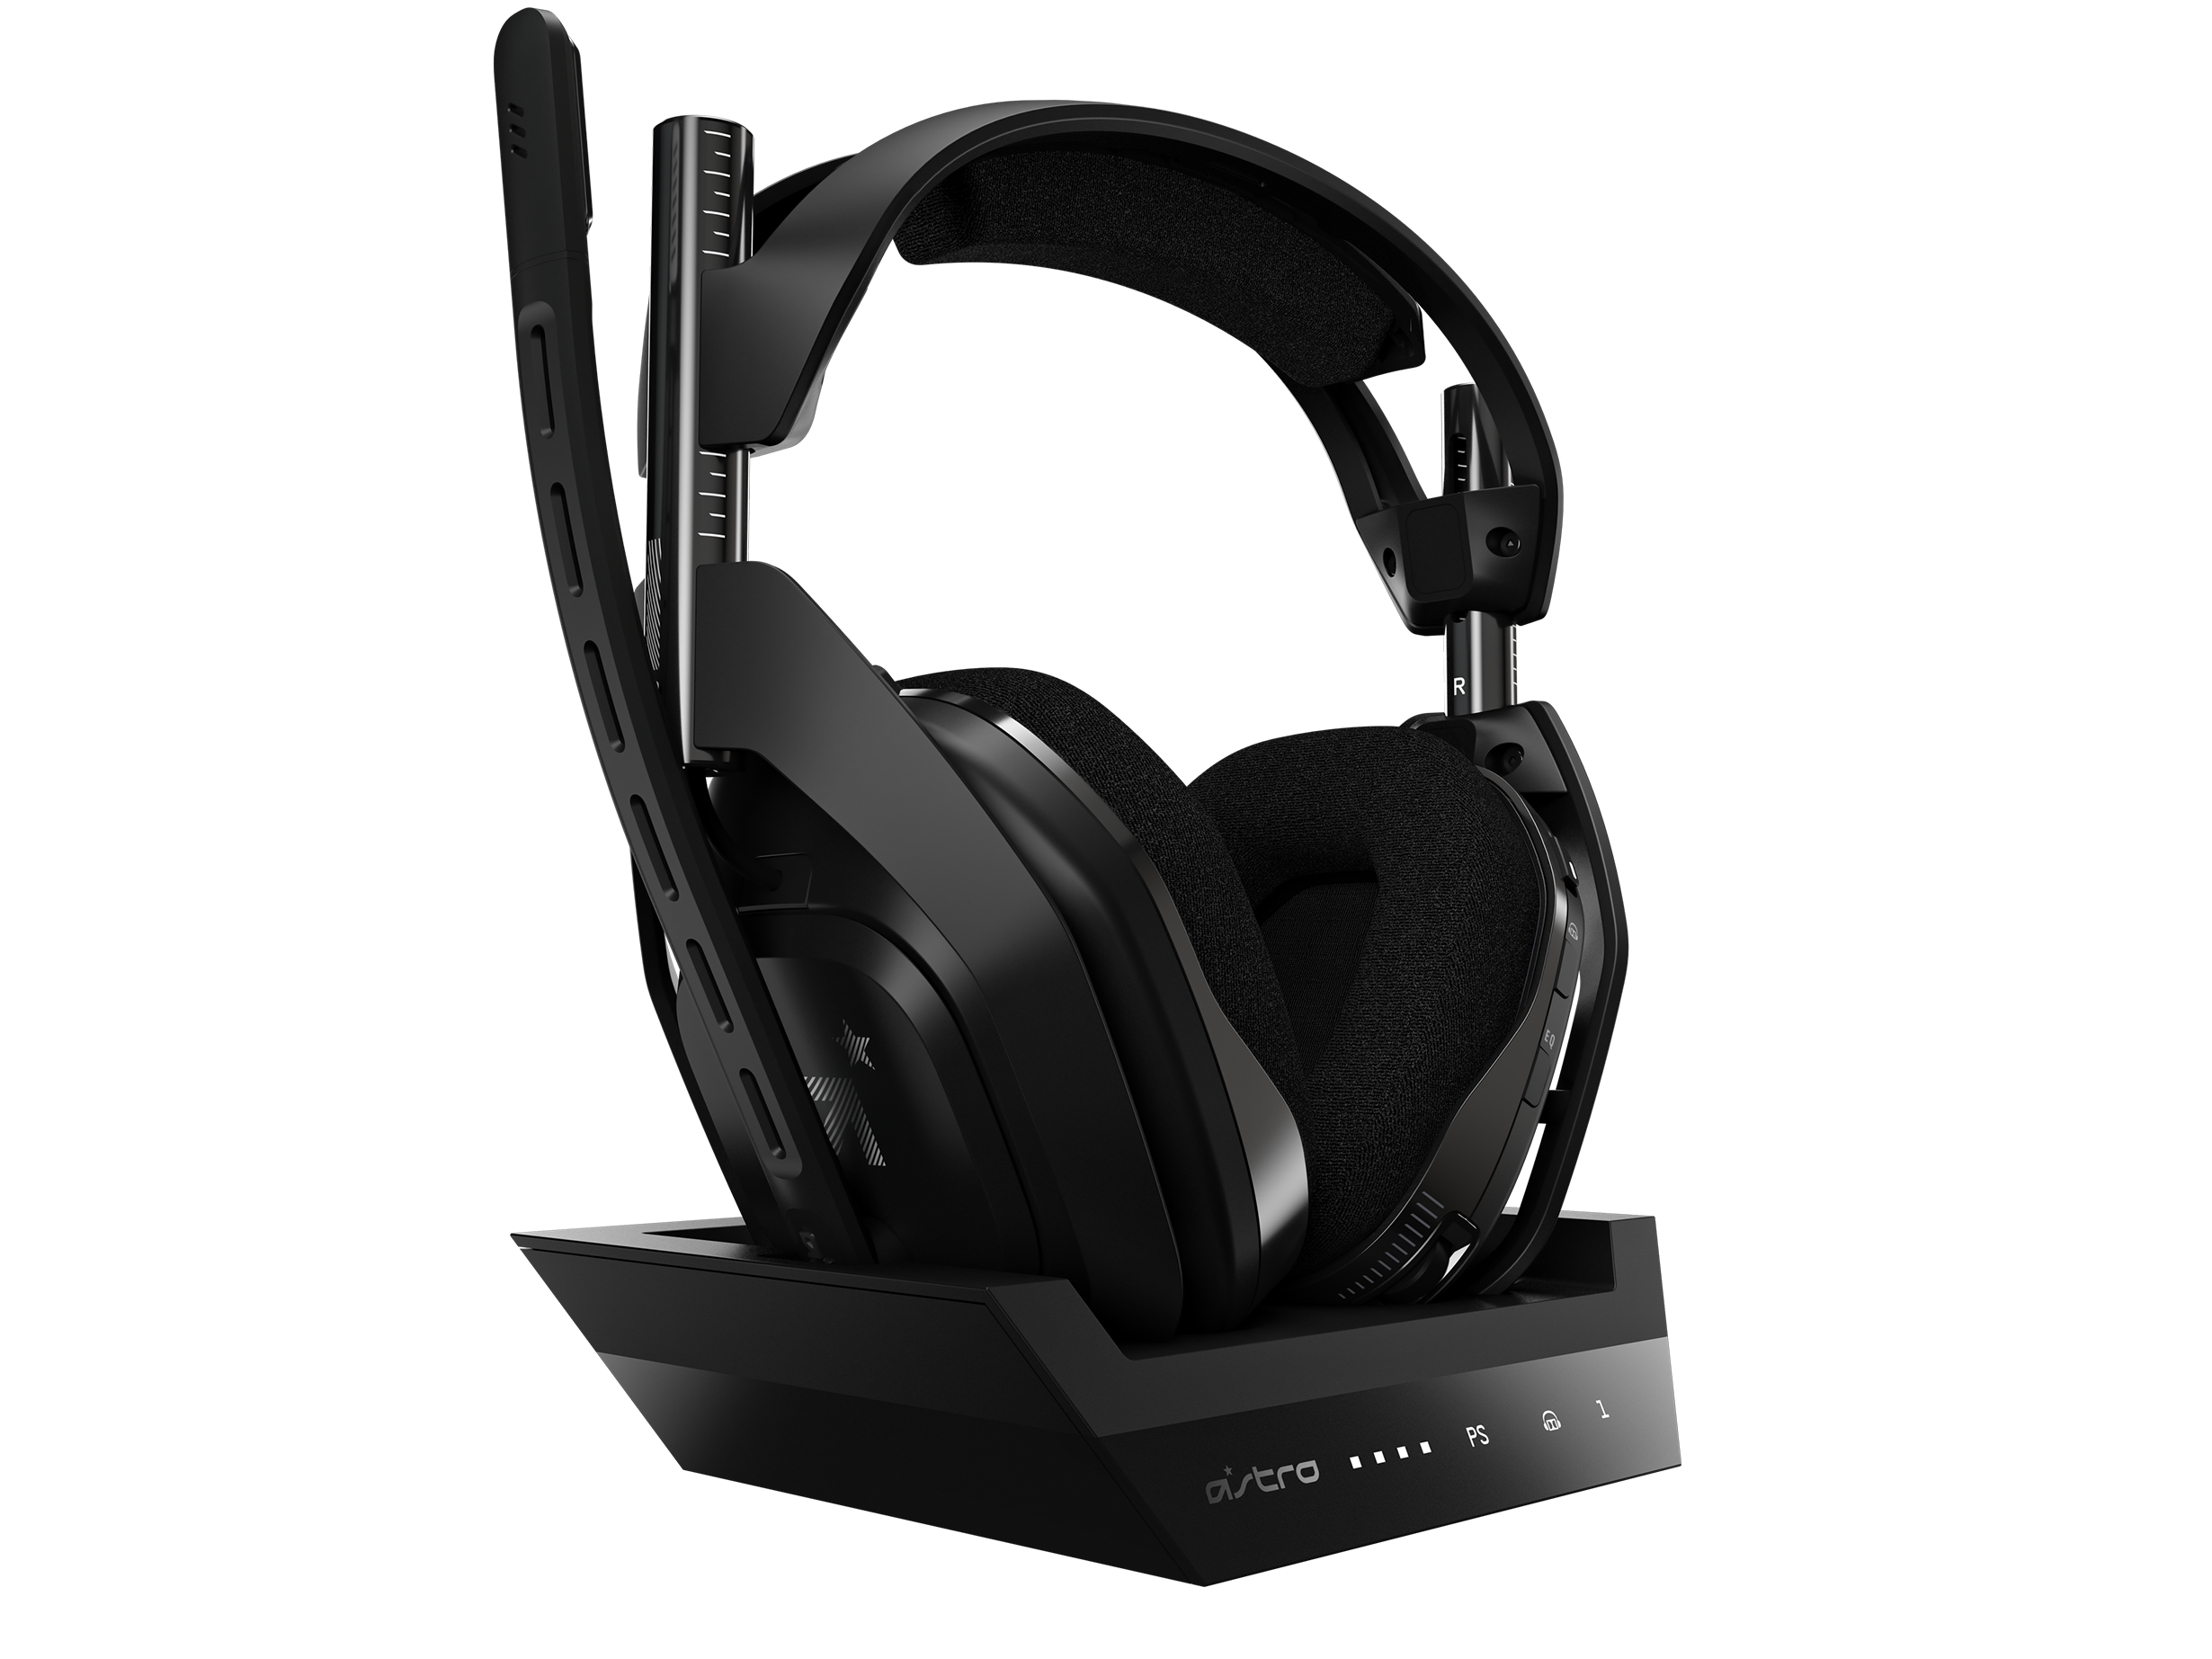 Visit the official Astro website and download the latest firmware and software updates for the Astro A50 headset.
Connect the Astro A50 to a computer using a USB cable.